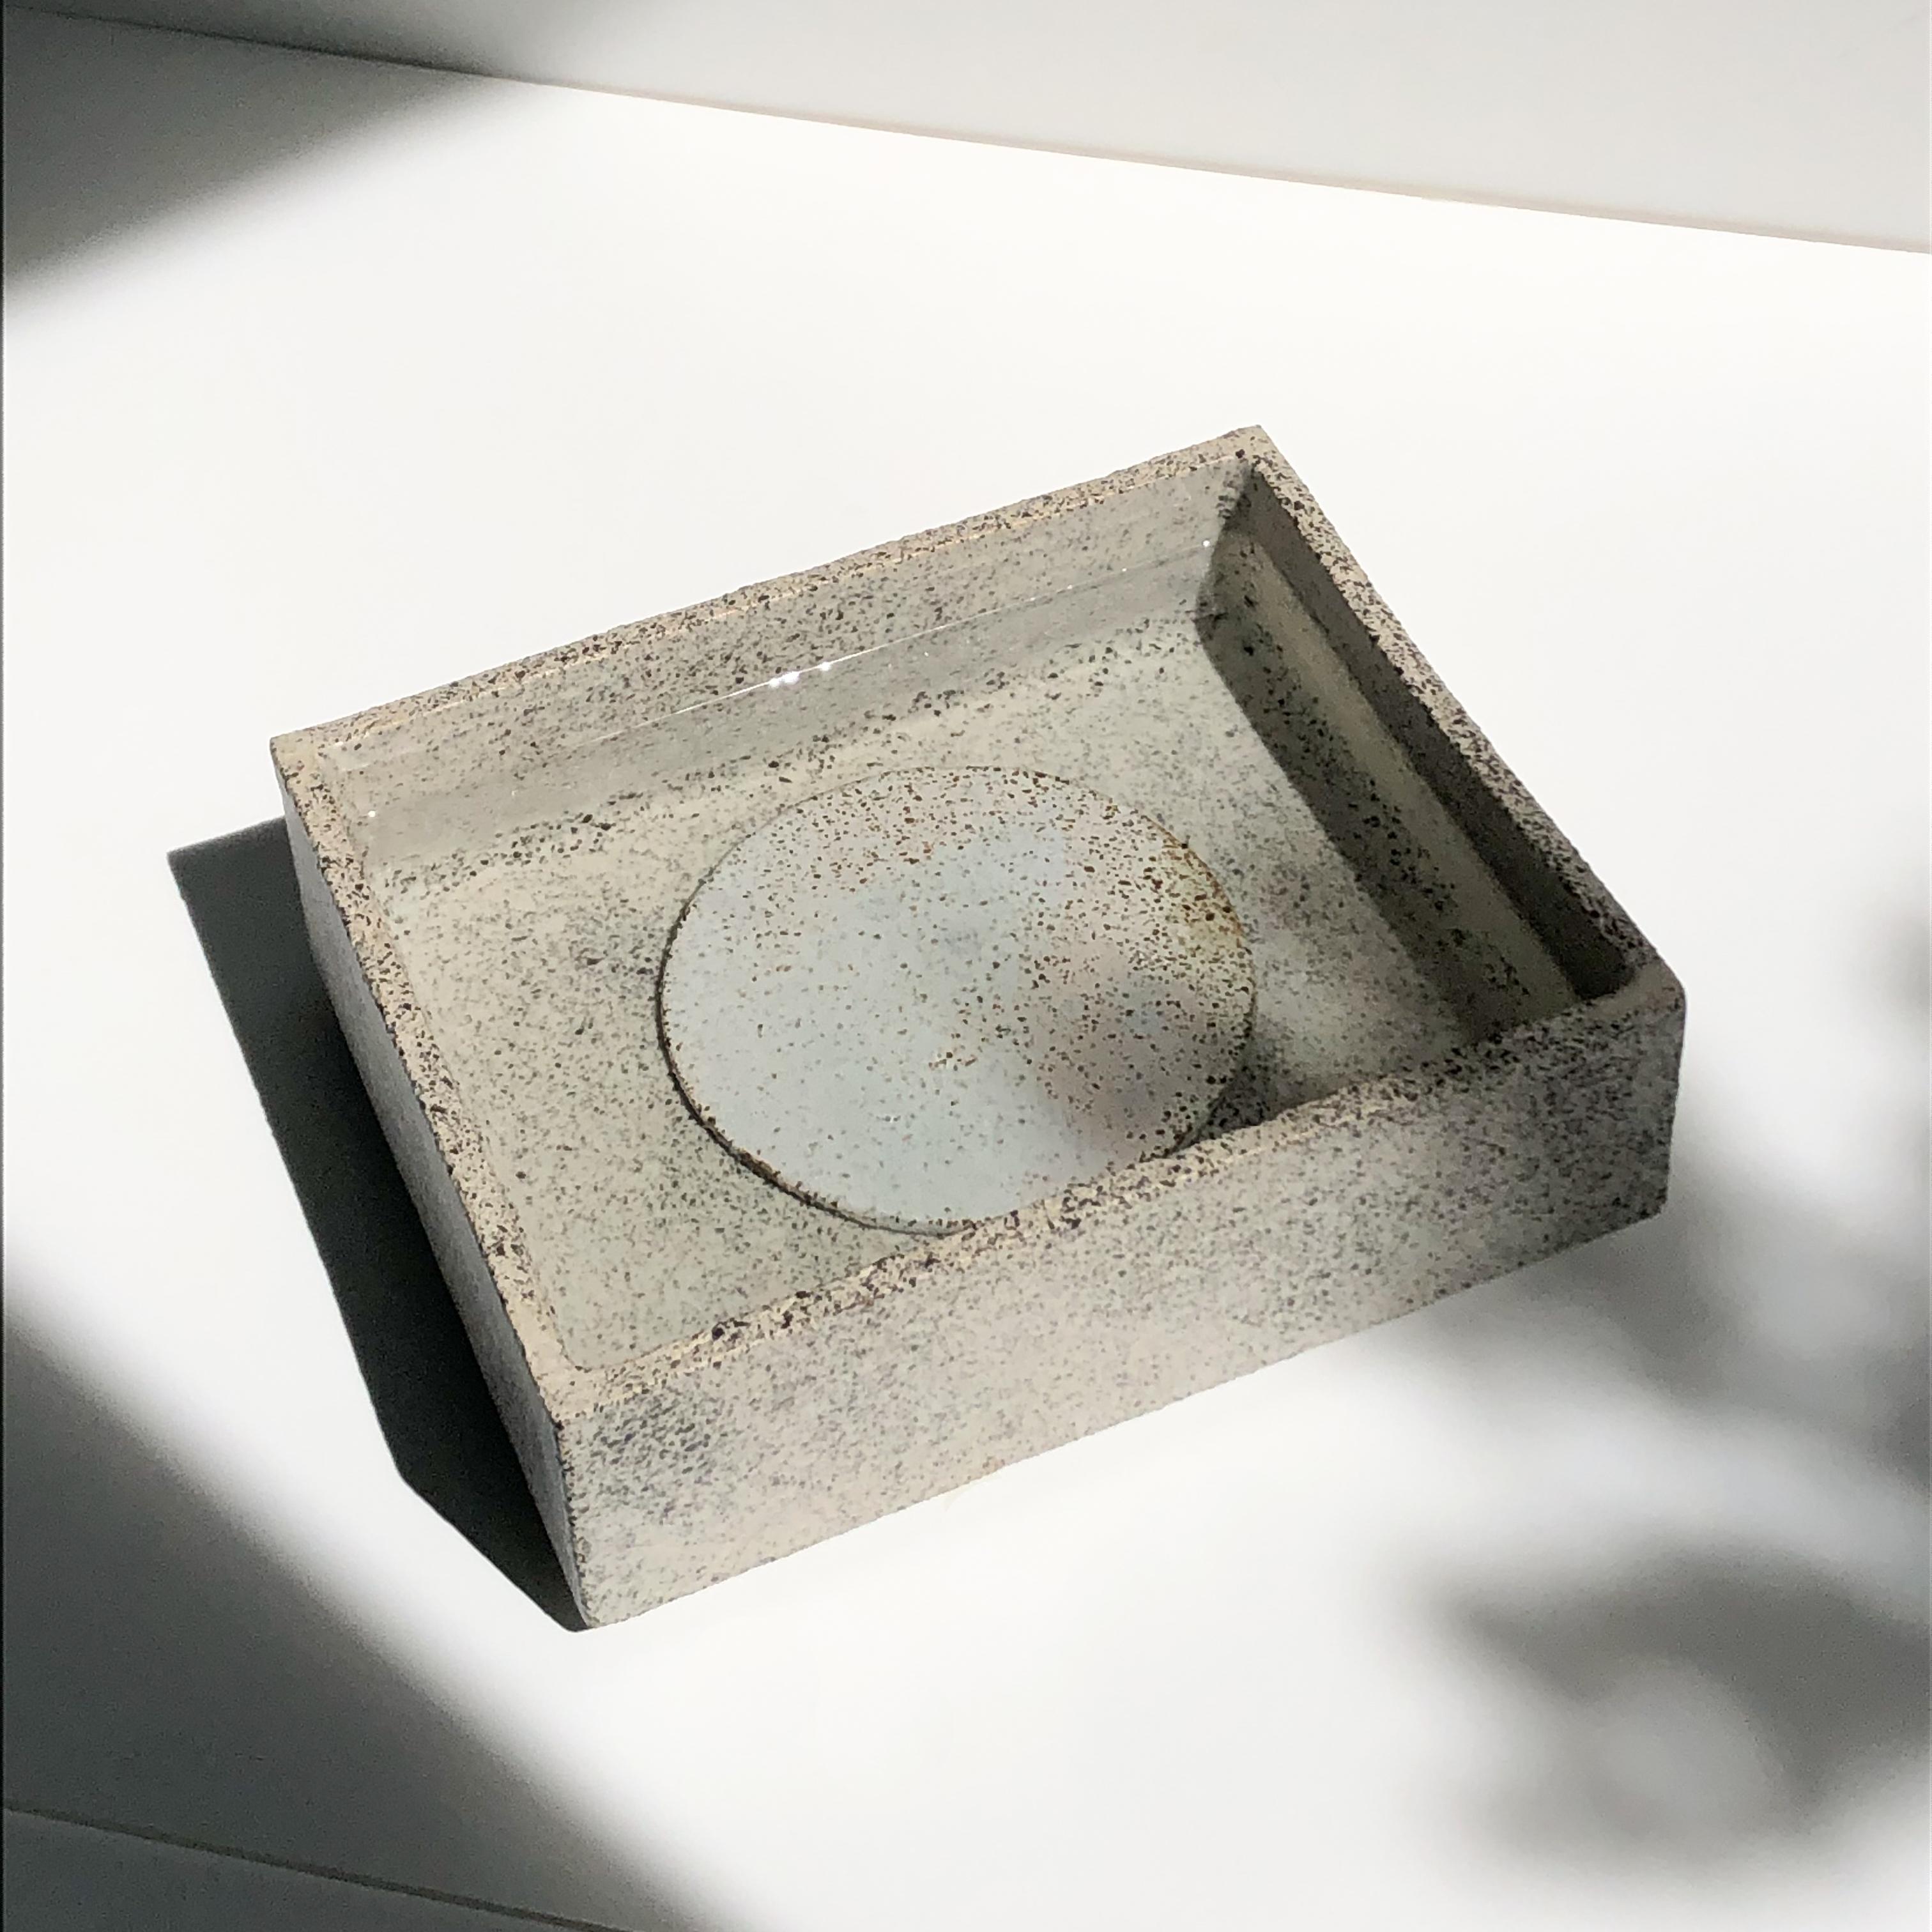 Pool I box by Wendy Taylor
Dimensions: D 17.7 x W 7.4 x H 22.4 cm
Materials: stoneware, glazed

2 pieces, box and disc - can be used with flowerfrog for ikebana.
Stoneware, glazed exterior, interior. Glaze color/ surface pattern may
vary.